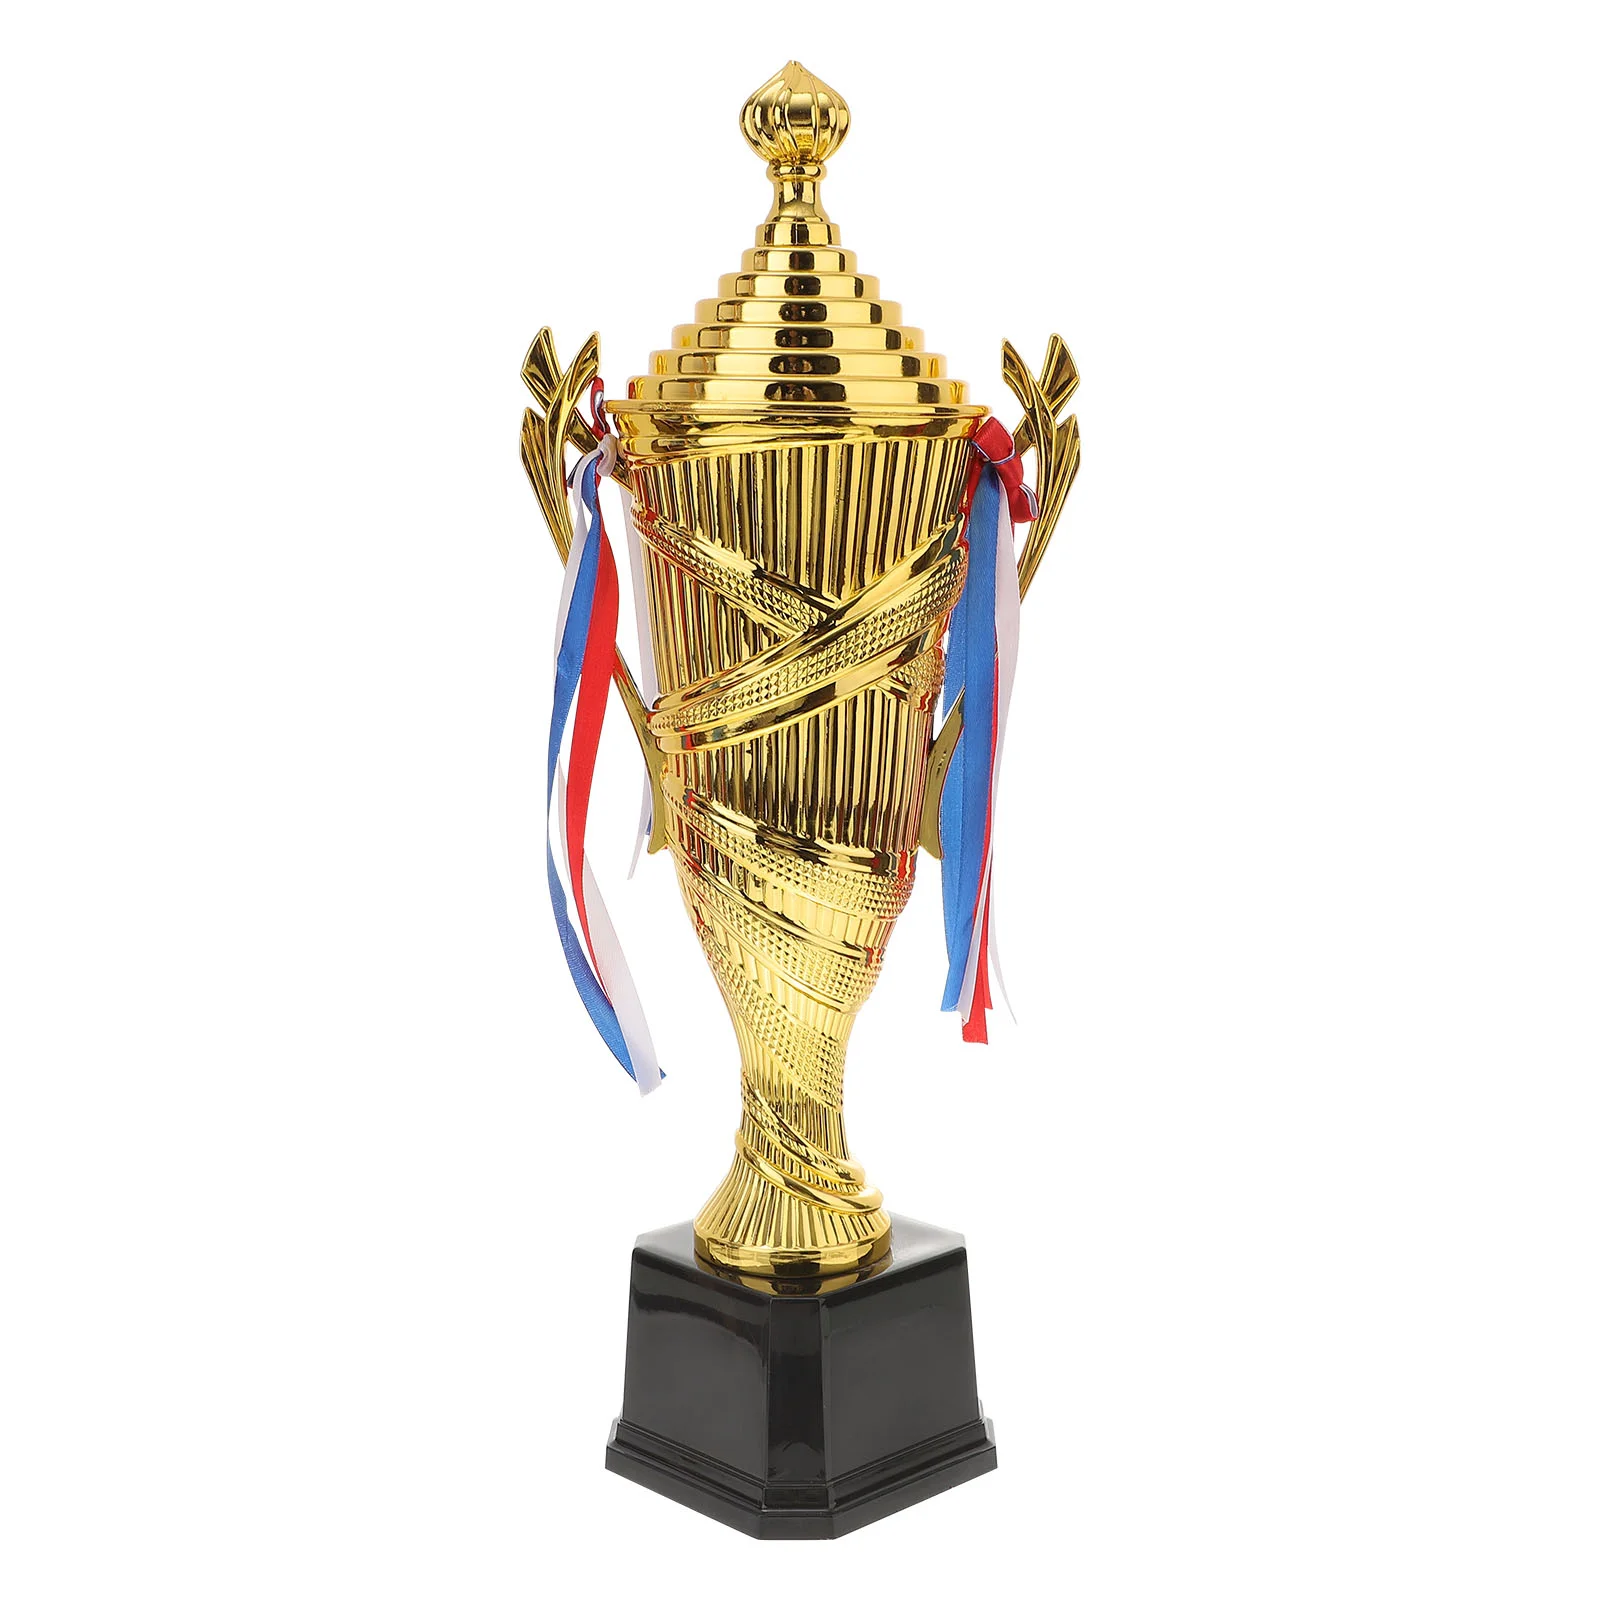 

Trophy Award Cup Trophies Gold Winner Rewardcompetition Game Kids Prizepartystar Graduates Contest Swirl Ceremony Cups Medals